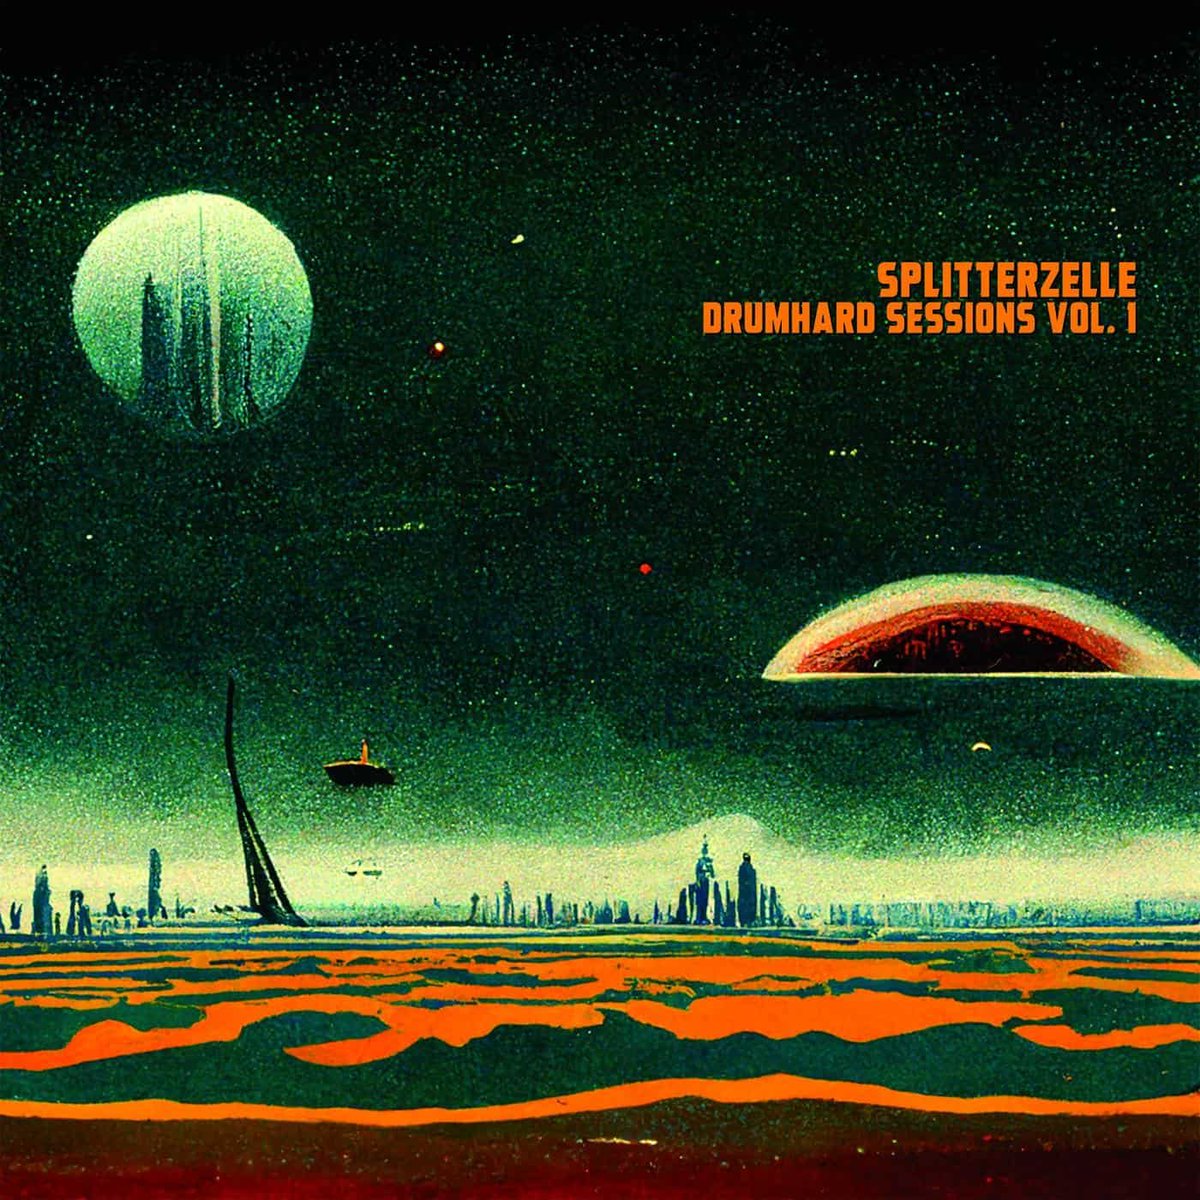 JUST IN! 'Drumhard Sessions Vol. 1' by Splitterzelle On the first of their collaborative jam-based projects, motorik space-psych rockers Splitterzelle recruit Rouven Bienert and Jonas Heheman of TV Strange. normanrecords.com/records/203134…